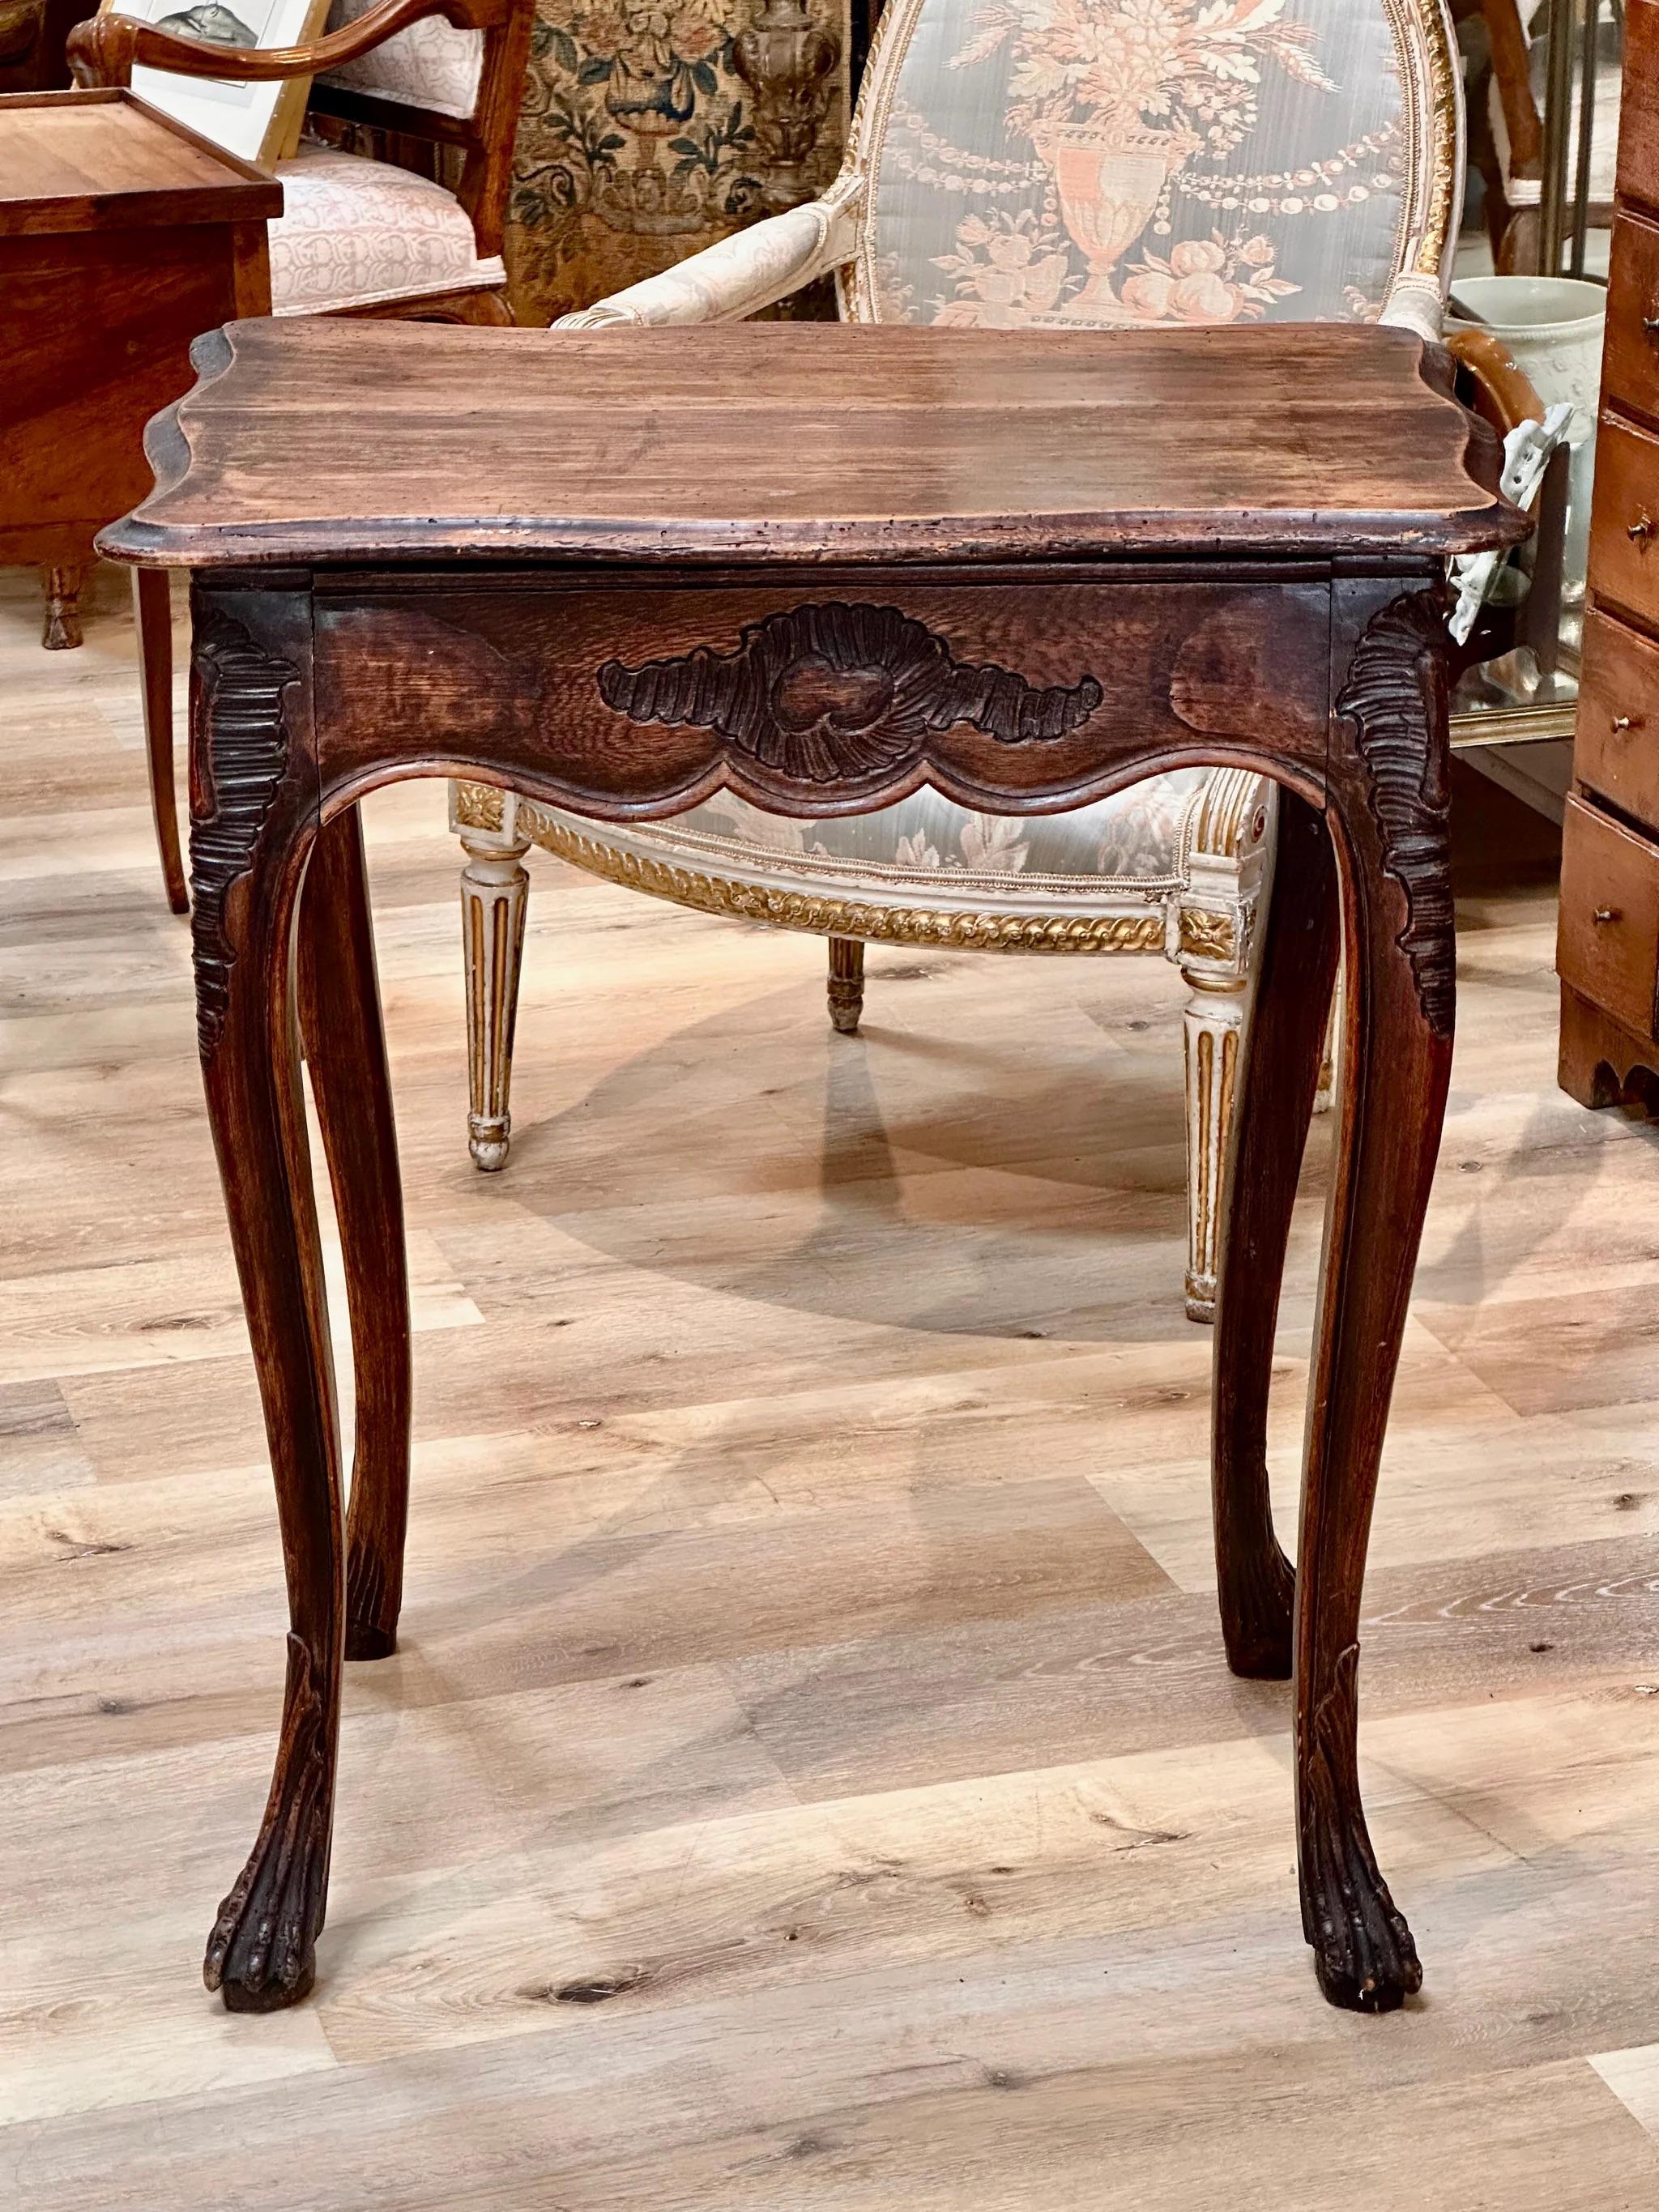 18th Century Louis XV French Provincial Side table, the figured rectangular top over finely carved skirt having elegant cabriole legs ending in beautiful claw feet on flattened balls.   H 31.5